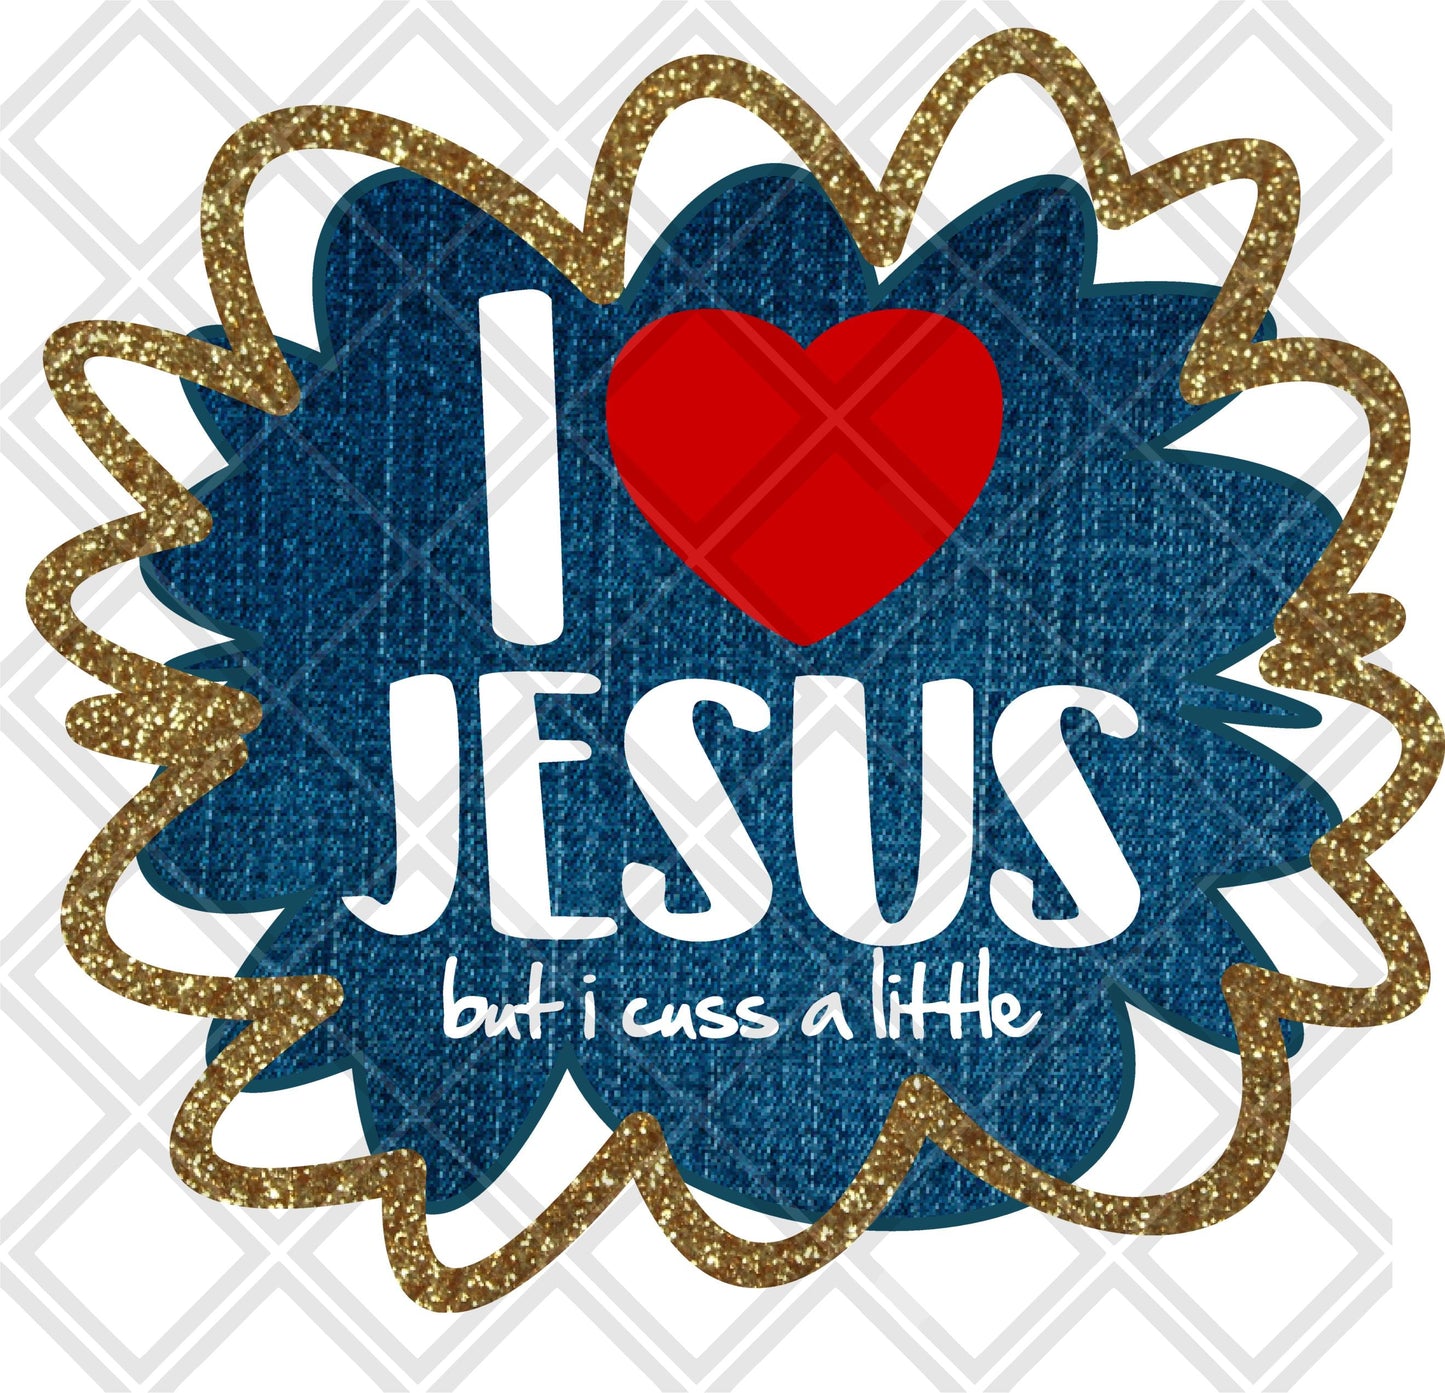 I LOVE JESUS BUT I CUSS A LITTLE WITH FRAME Digital Download Instand Download